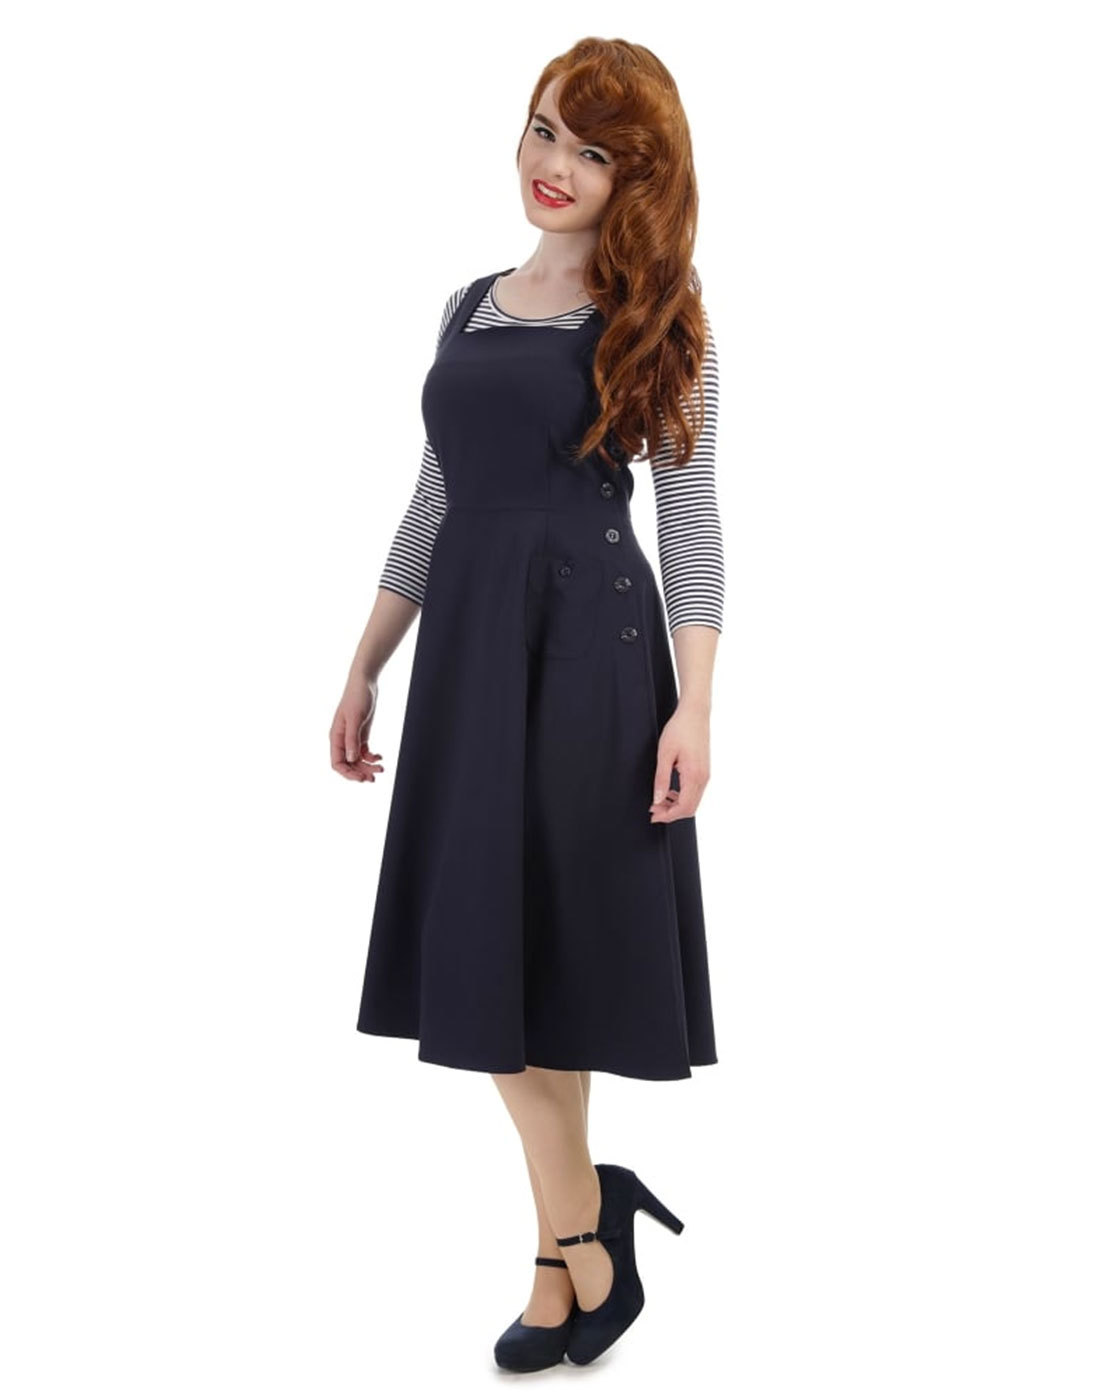 COLLECTIF Gertrude 1940s Plain Overalls Day Dress